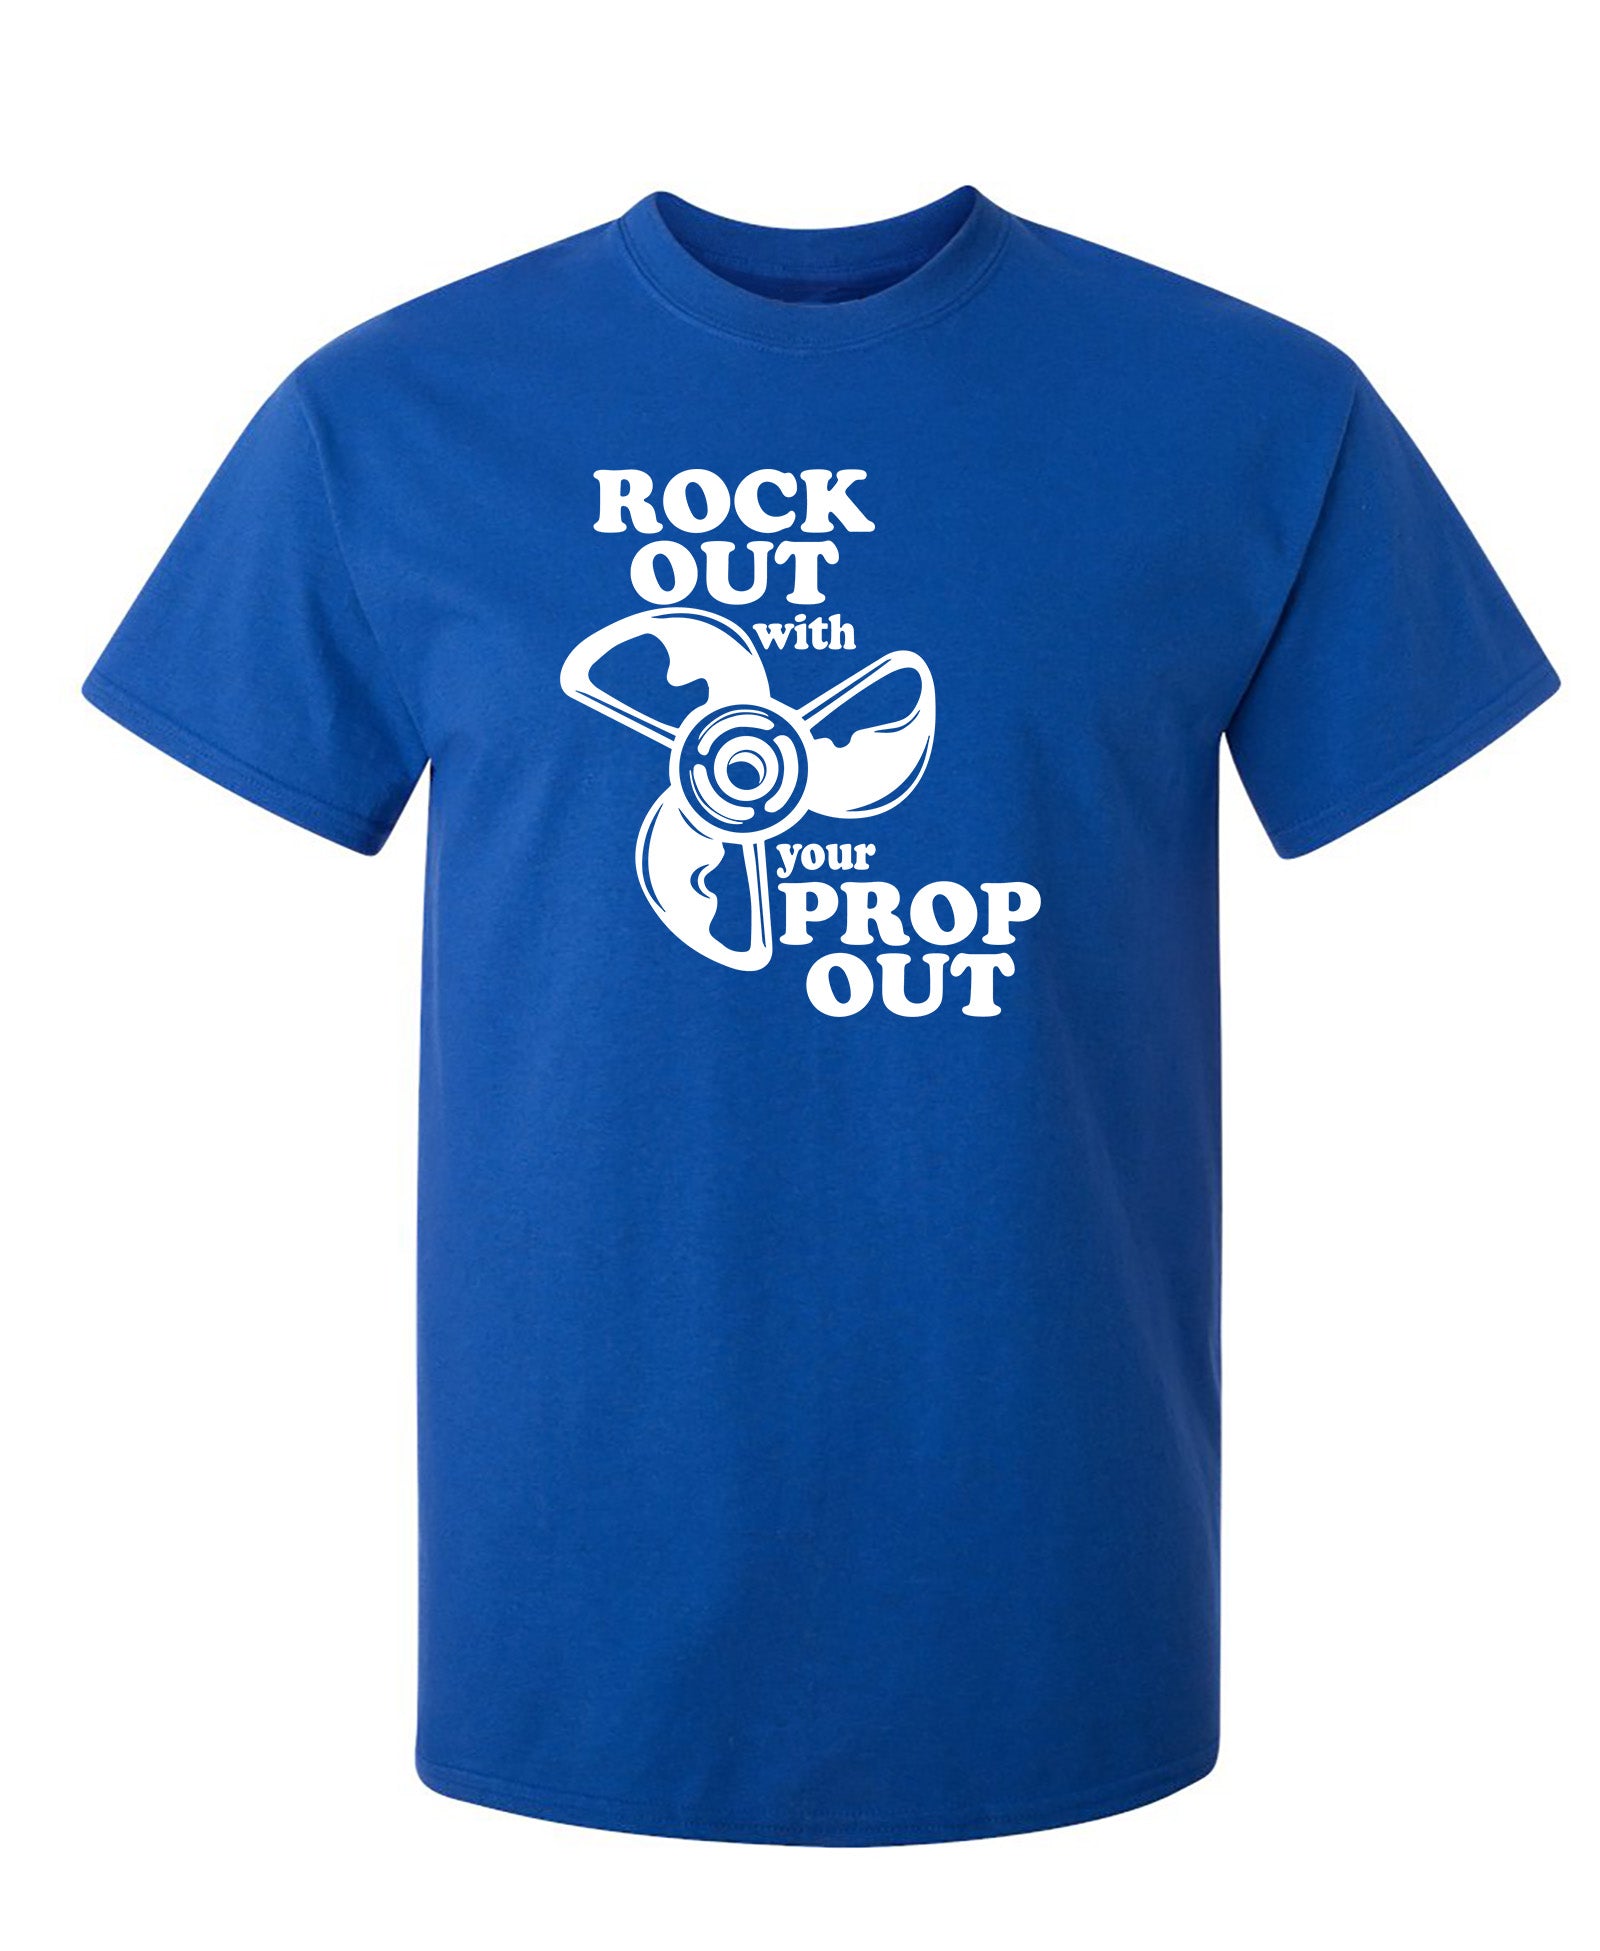 Rock out with your prop out - Funny T Shirts & Graphic Tees